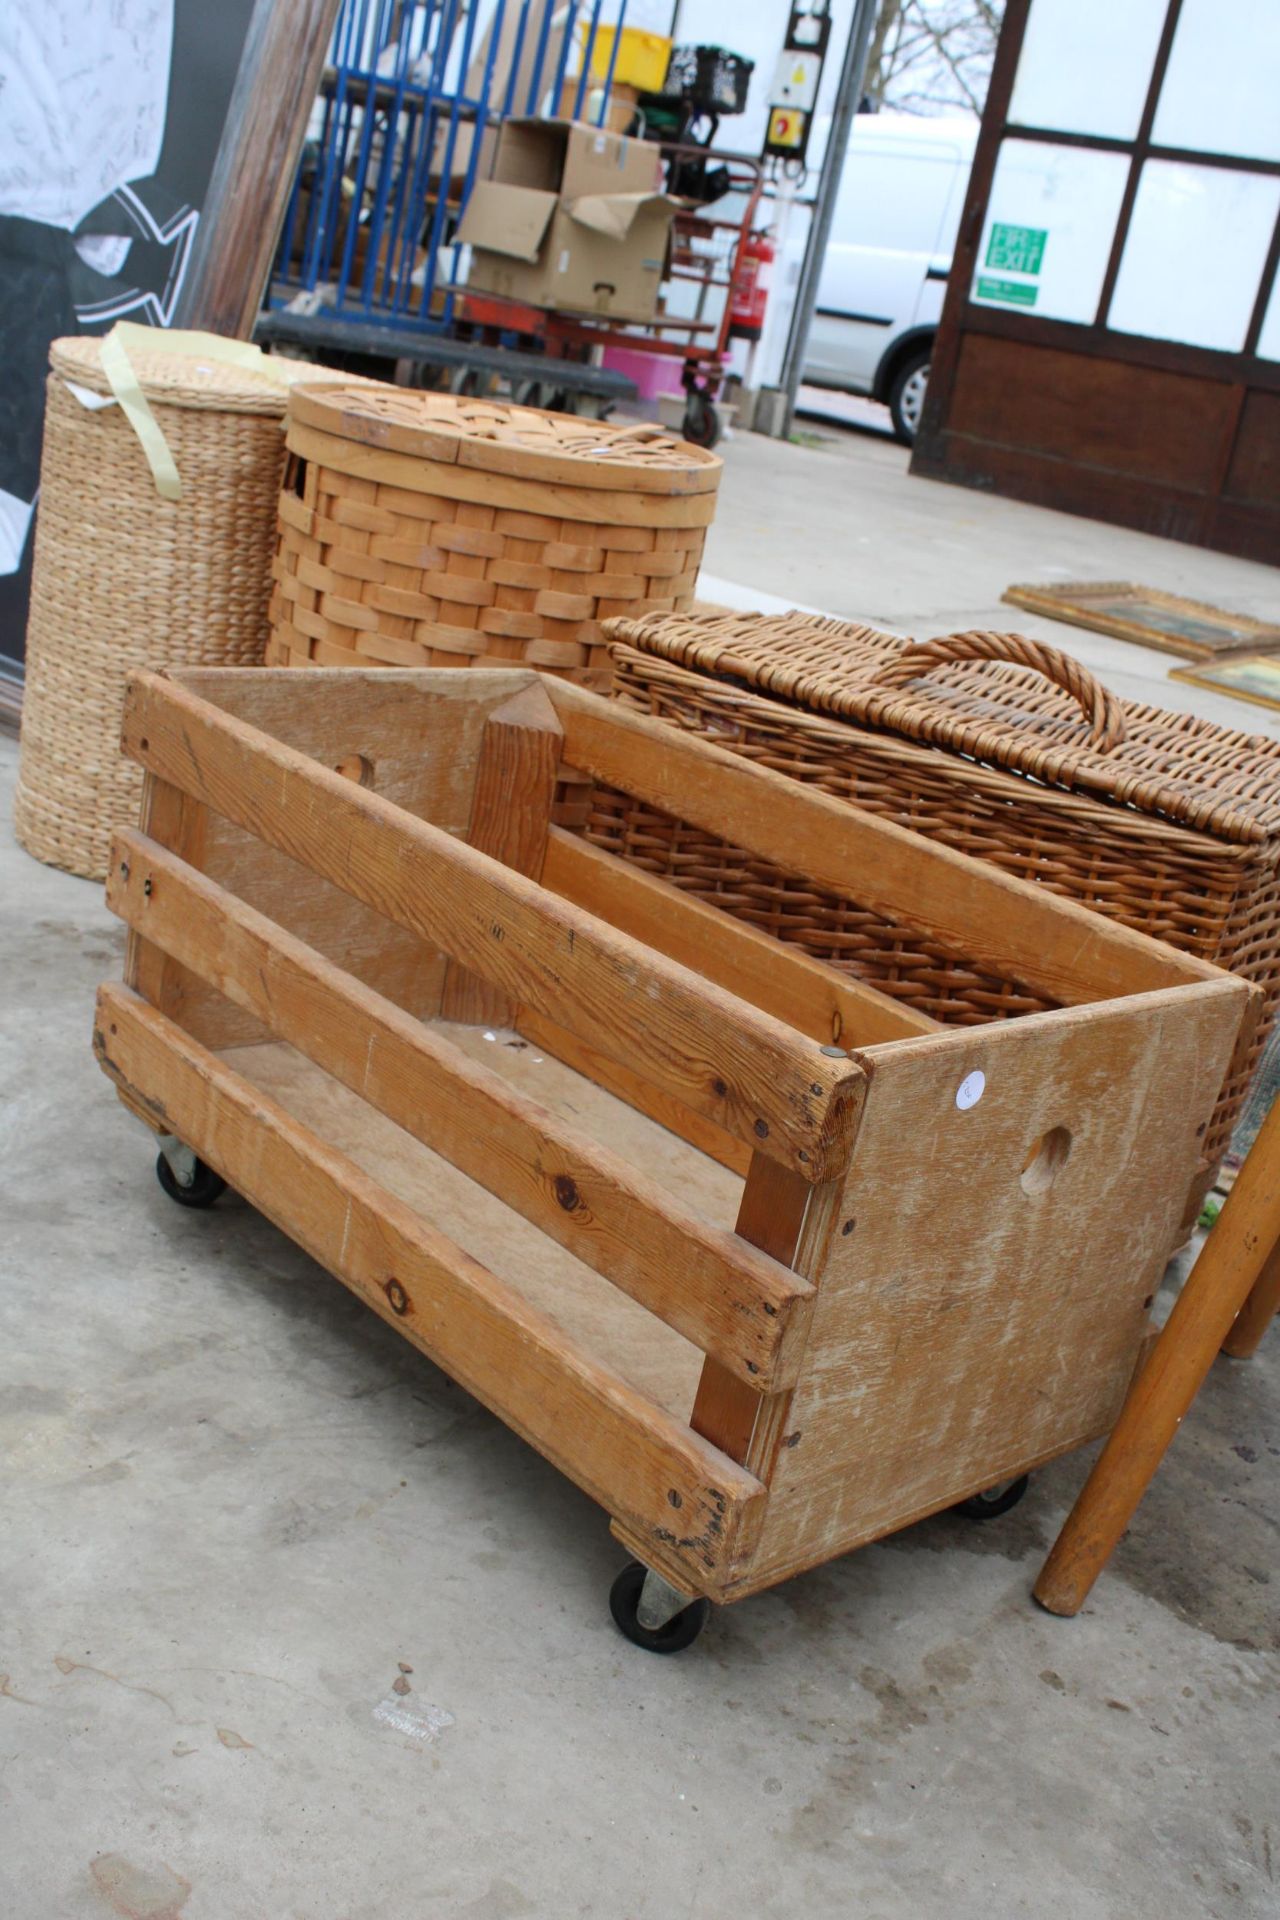 A TALL PINE STOOL, WICKER BASKETS AND A WOODEN BOX ETC - Image 2 of 3